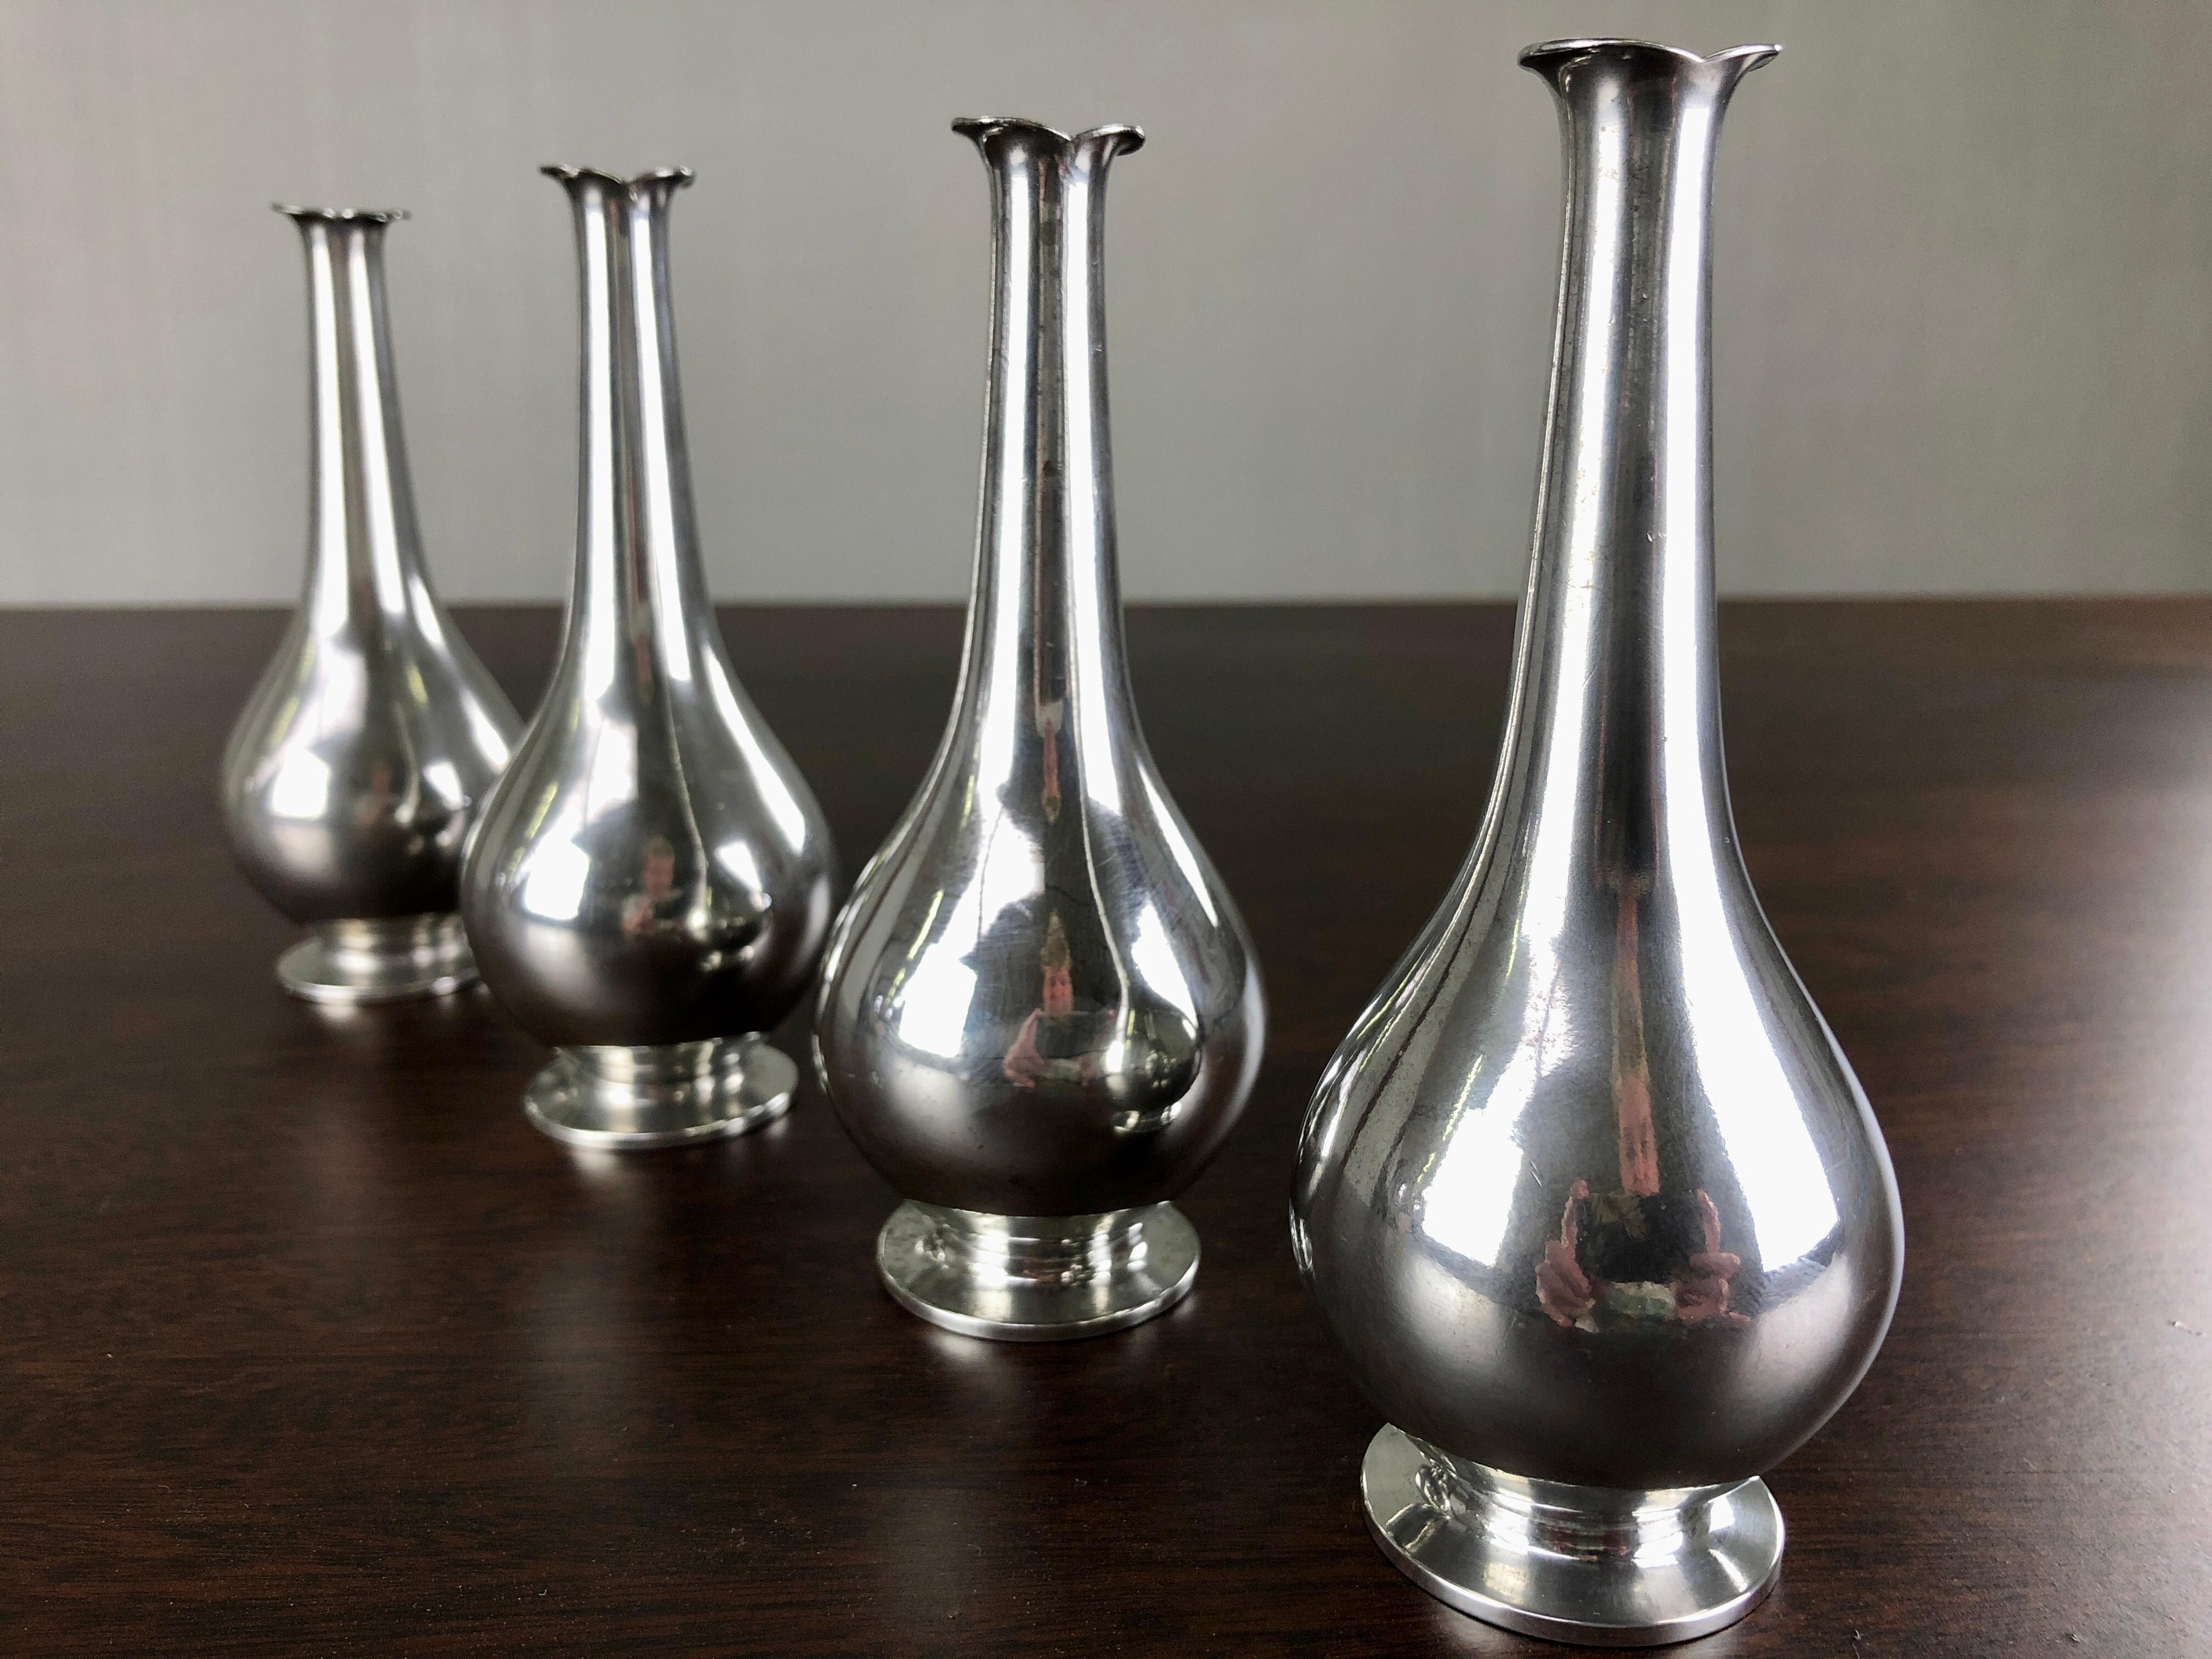 Set of four Danish Just Andersen art deco pewter vases produced by Just Andersen A/S in the 1930´s.

The vases with their simple yet demanding organic shapes are in very good vintage condition and all marked with Just. Andersens triangle mark.